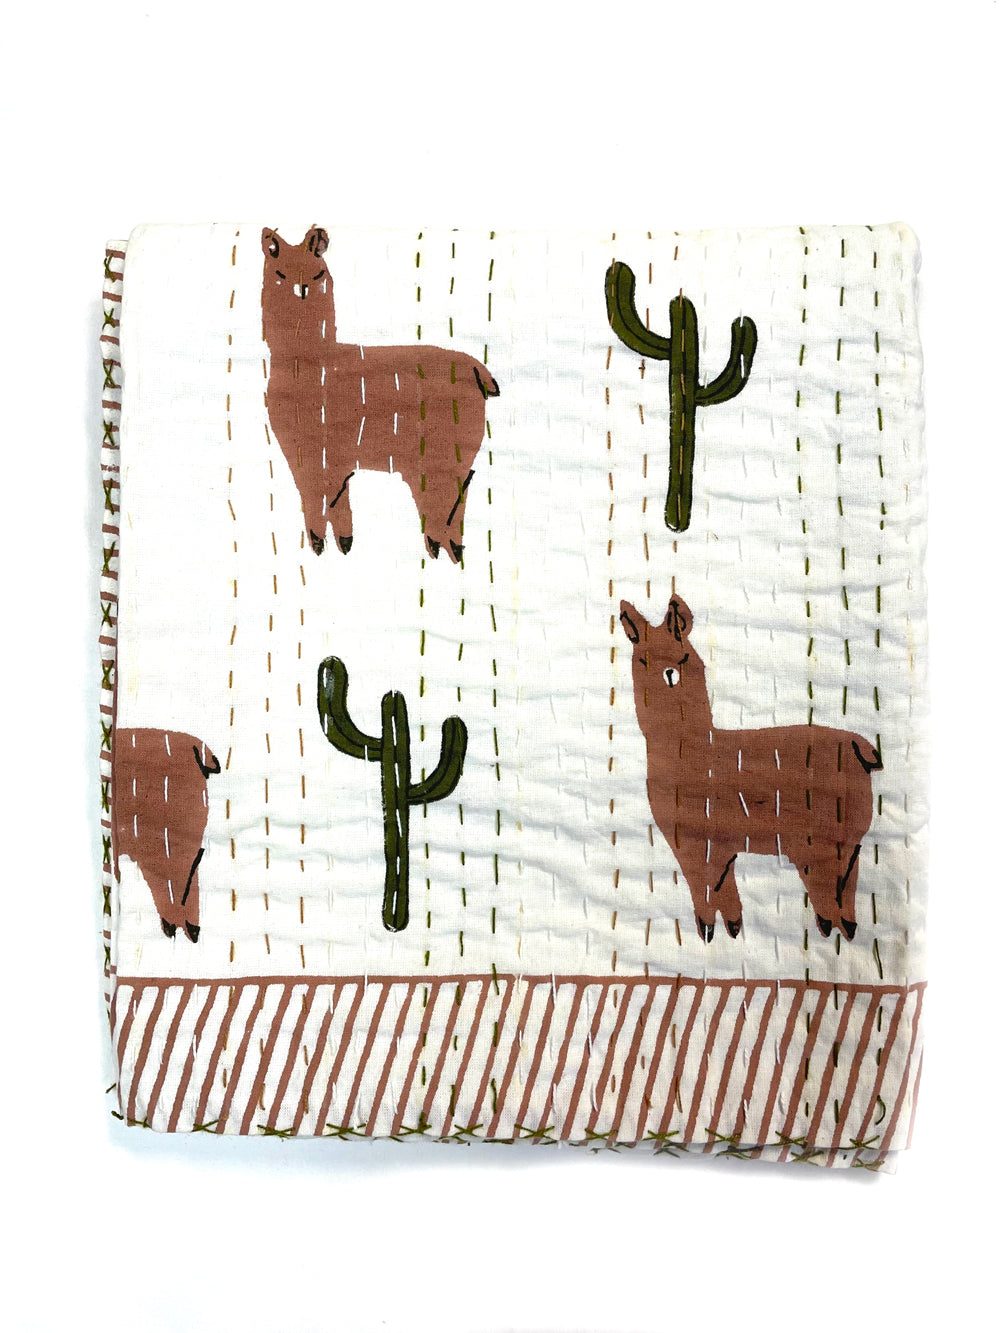 A quilt featuring llamas and cacti. Sustainable creative accessories.